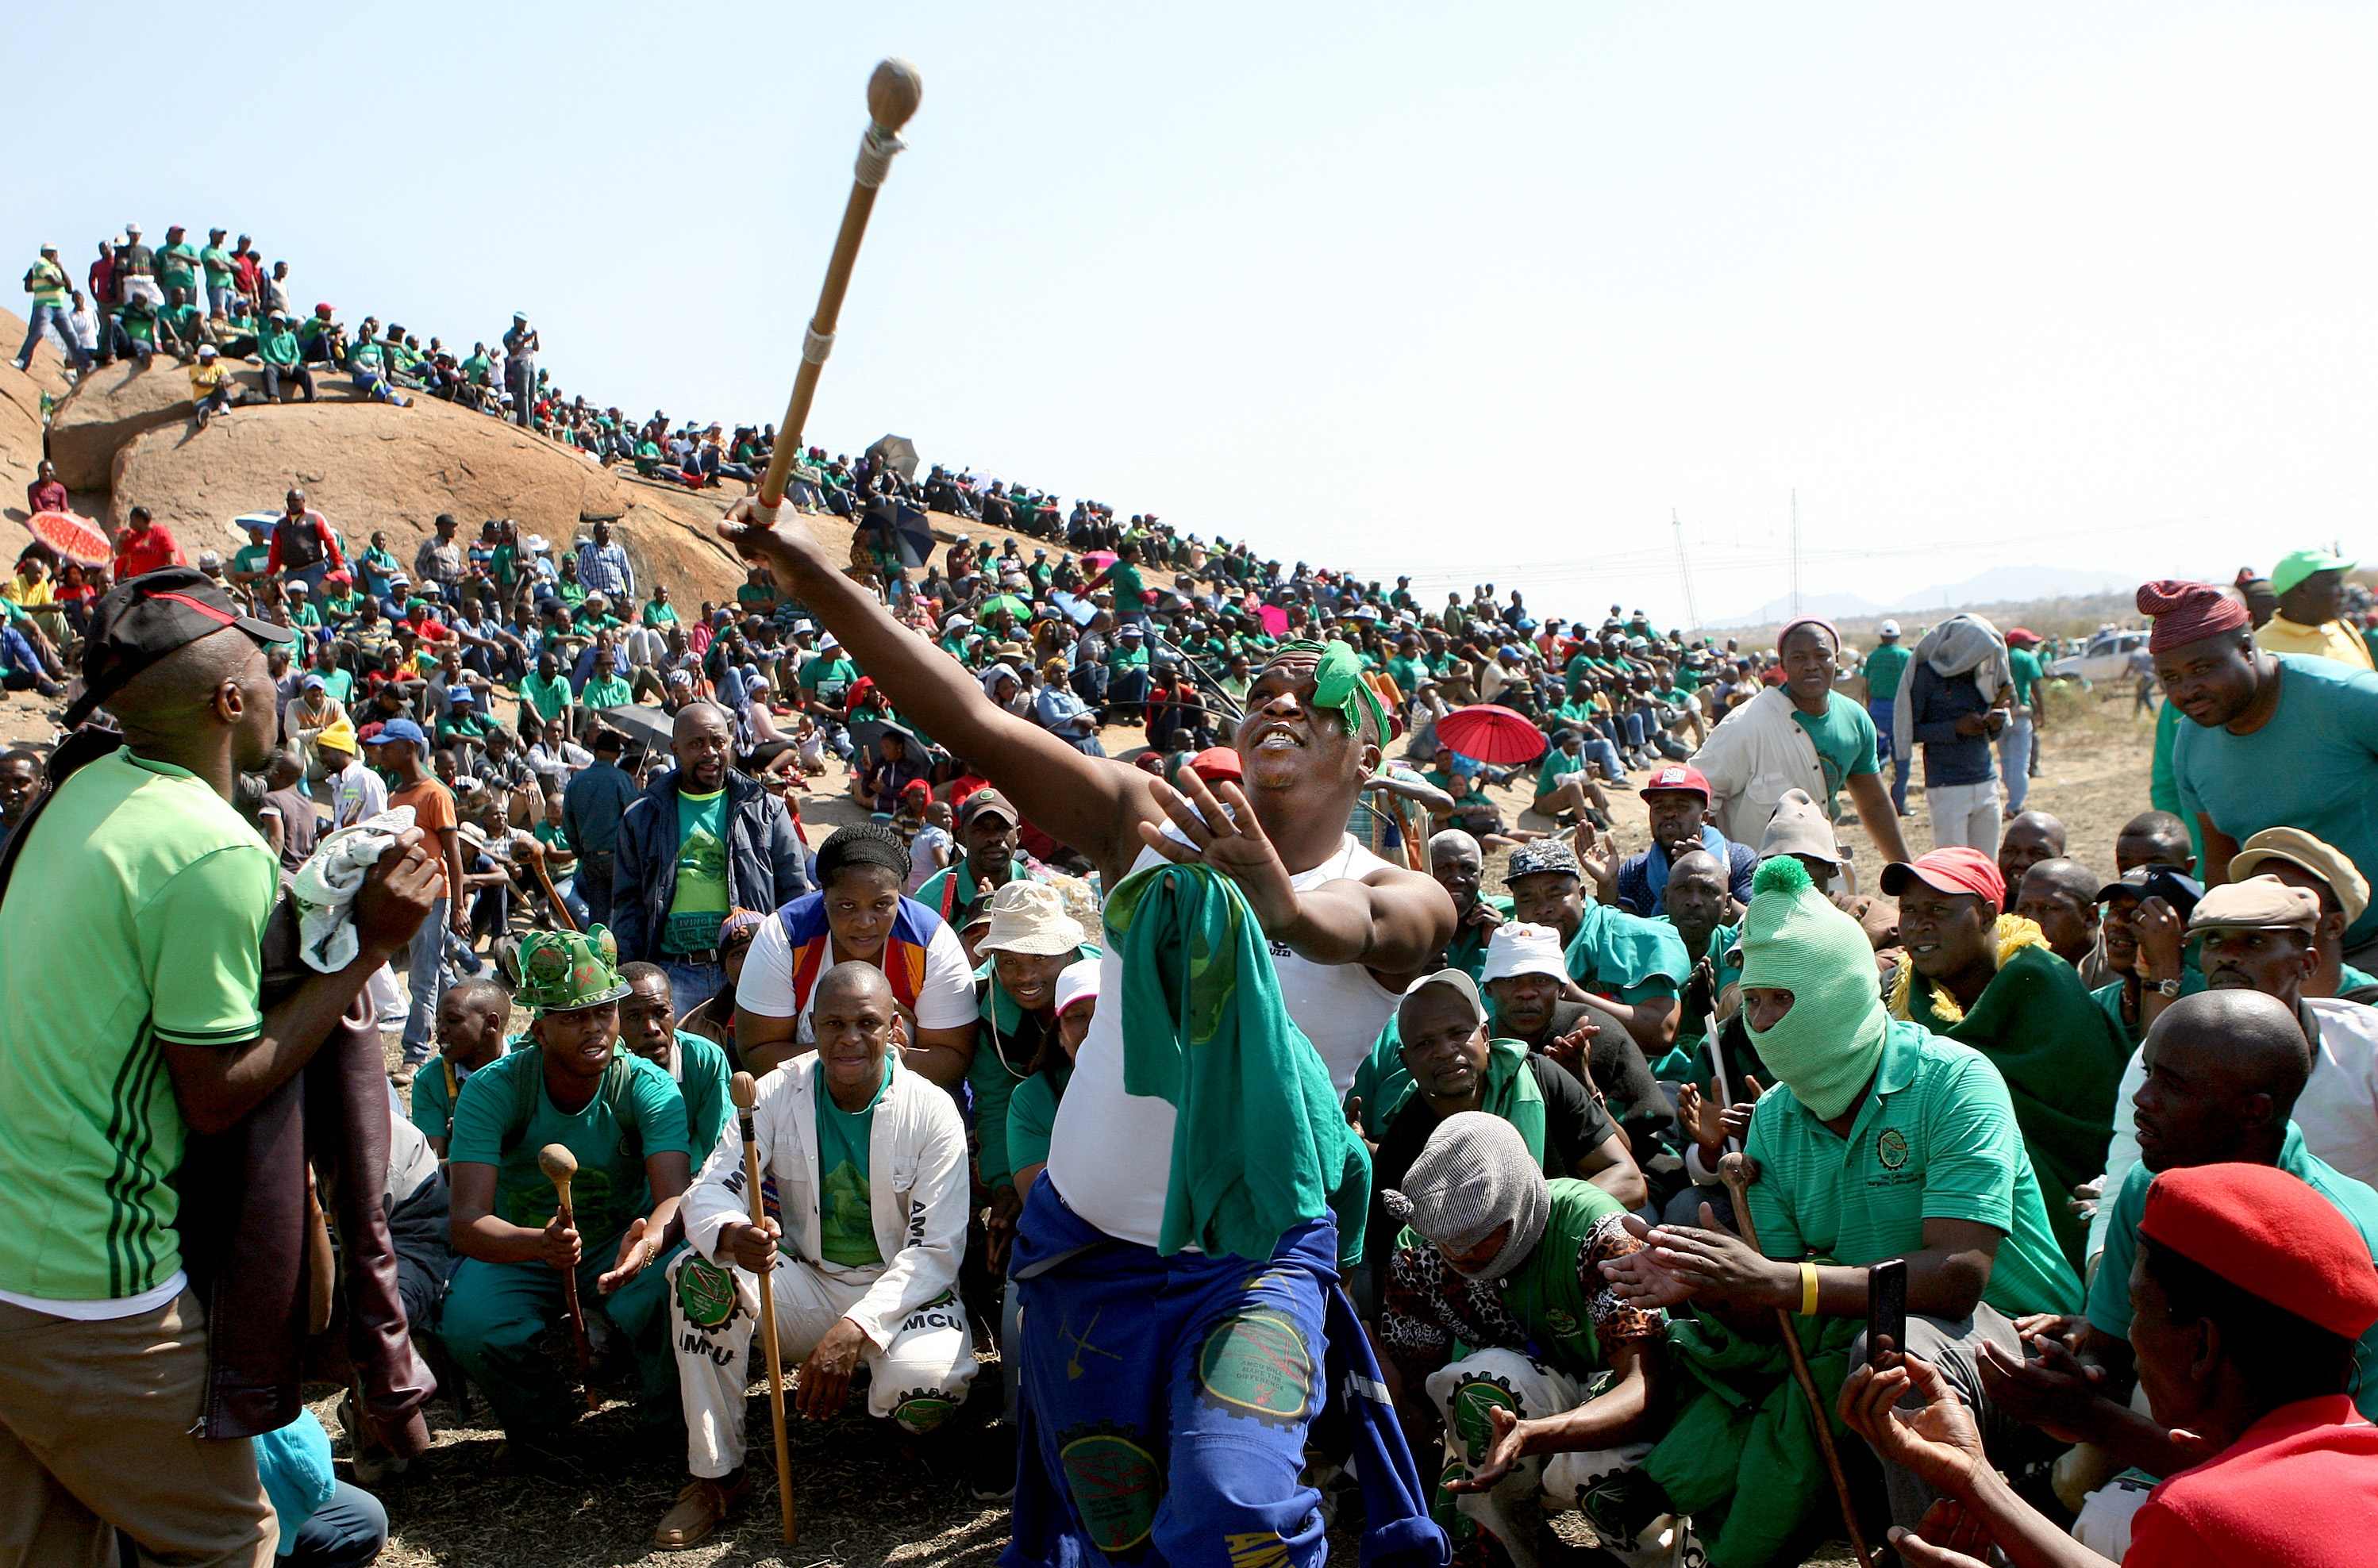 exclusive — amcu says new labour party registered, invites ‘progressive forces’, including other unions, to join